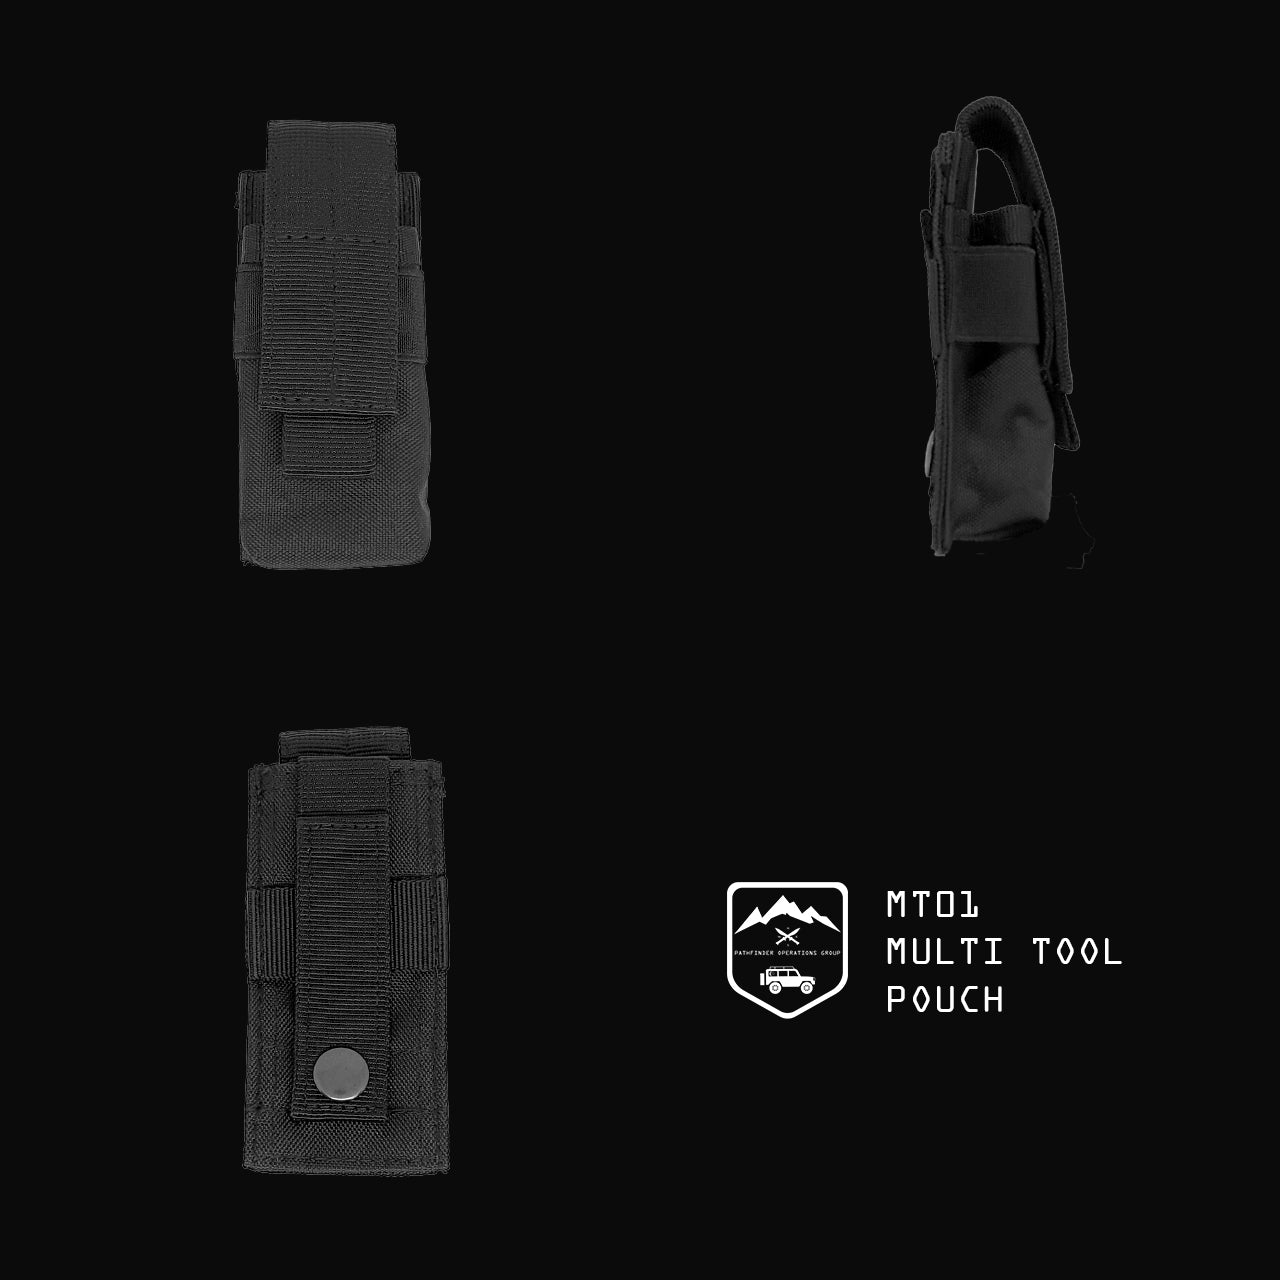 MT01 Multitool Pouch